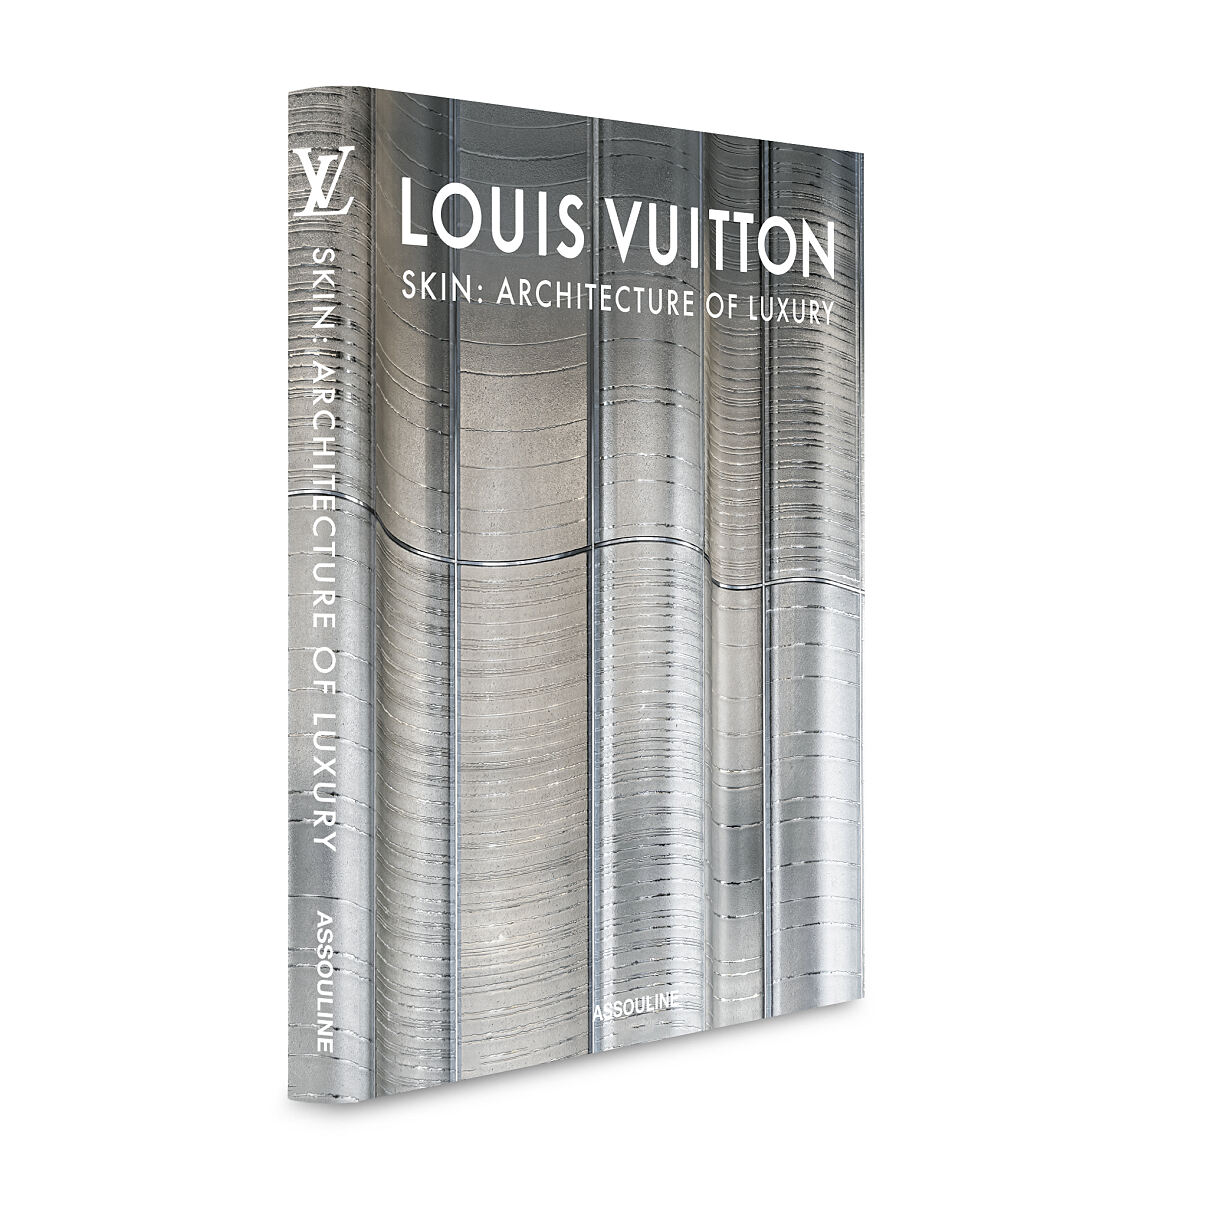 LV_Louis Vuitton Skin - The Architecture of Luxury_Cover (1)